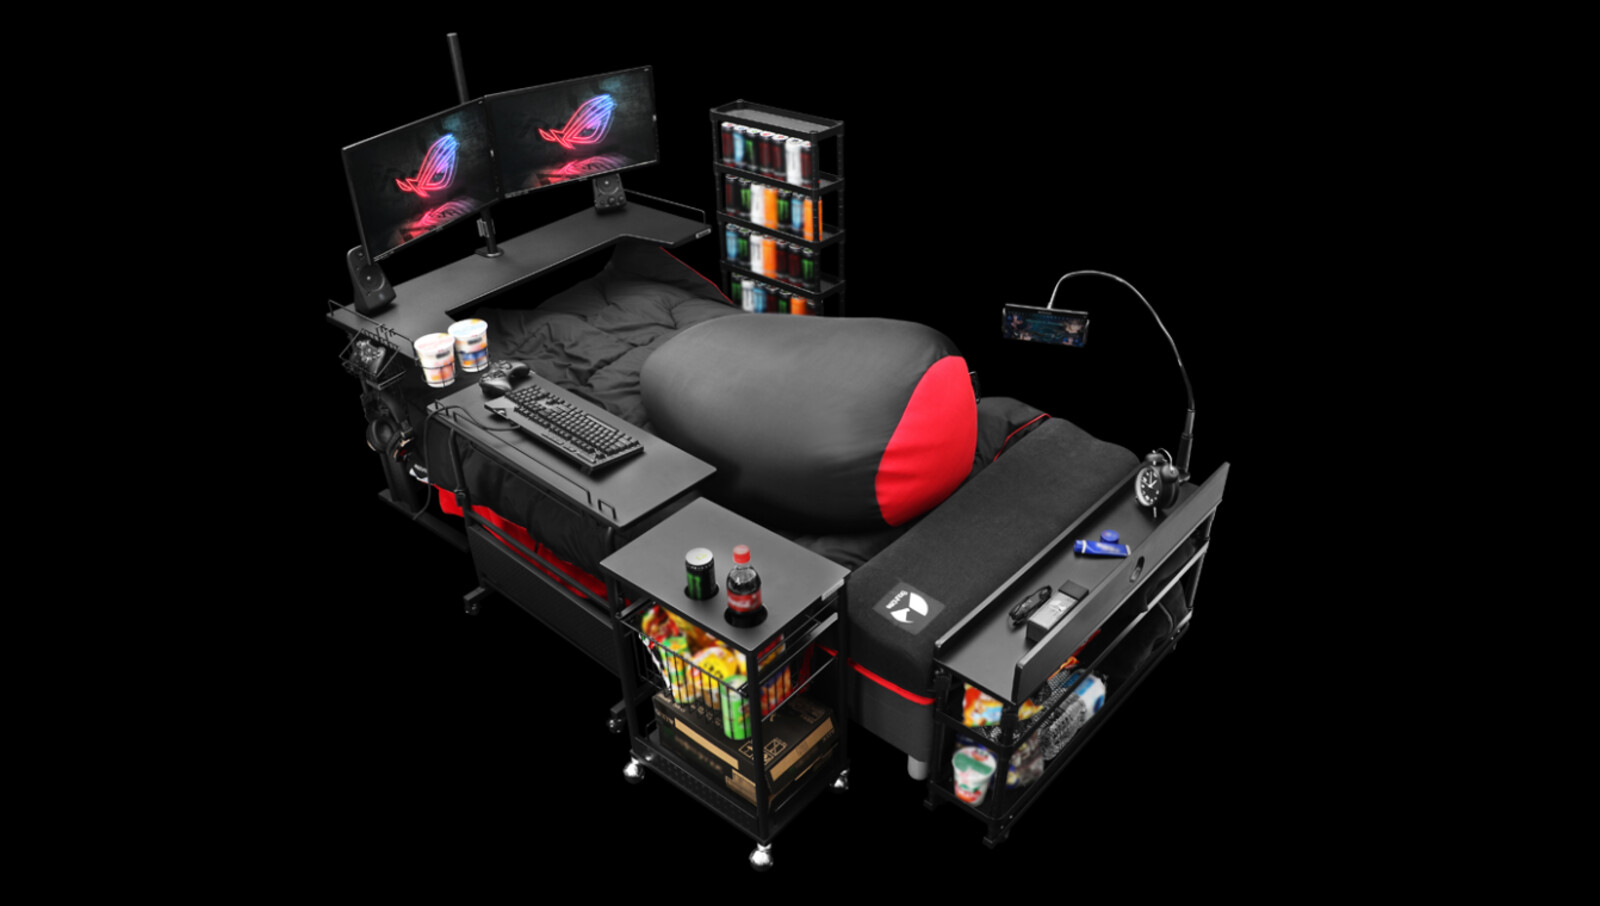 Bauhutte Japanese Gaming Bed Setup Can Replace Gaming Desks, Chairs